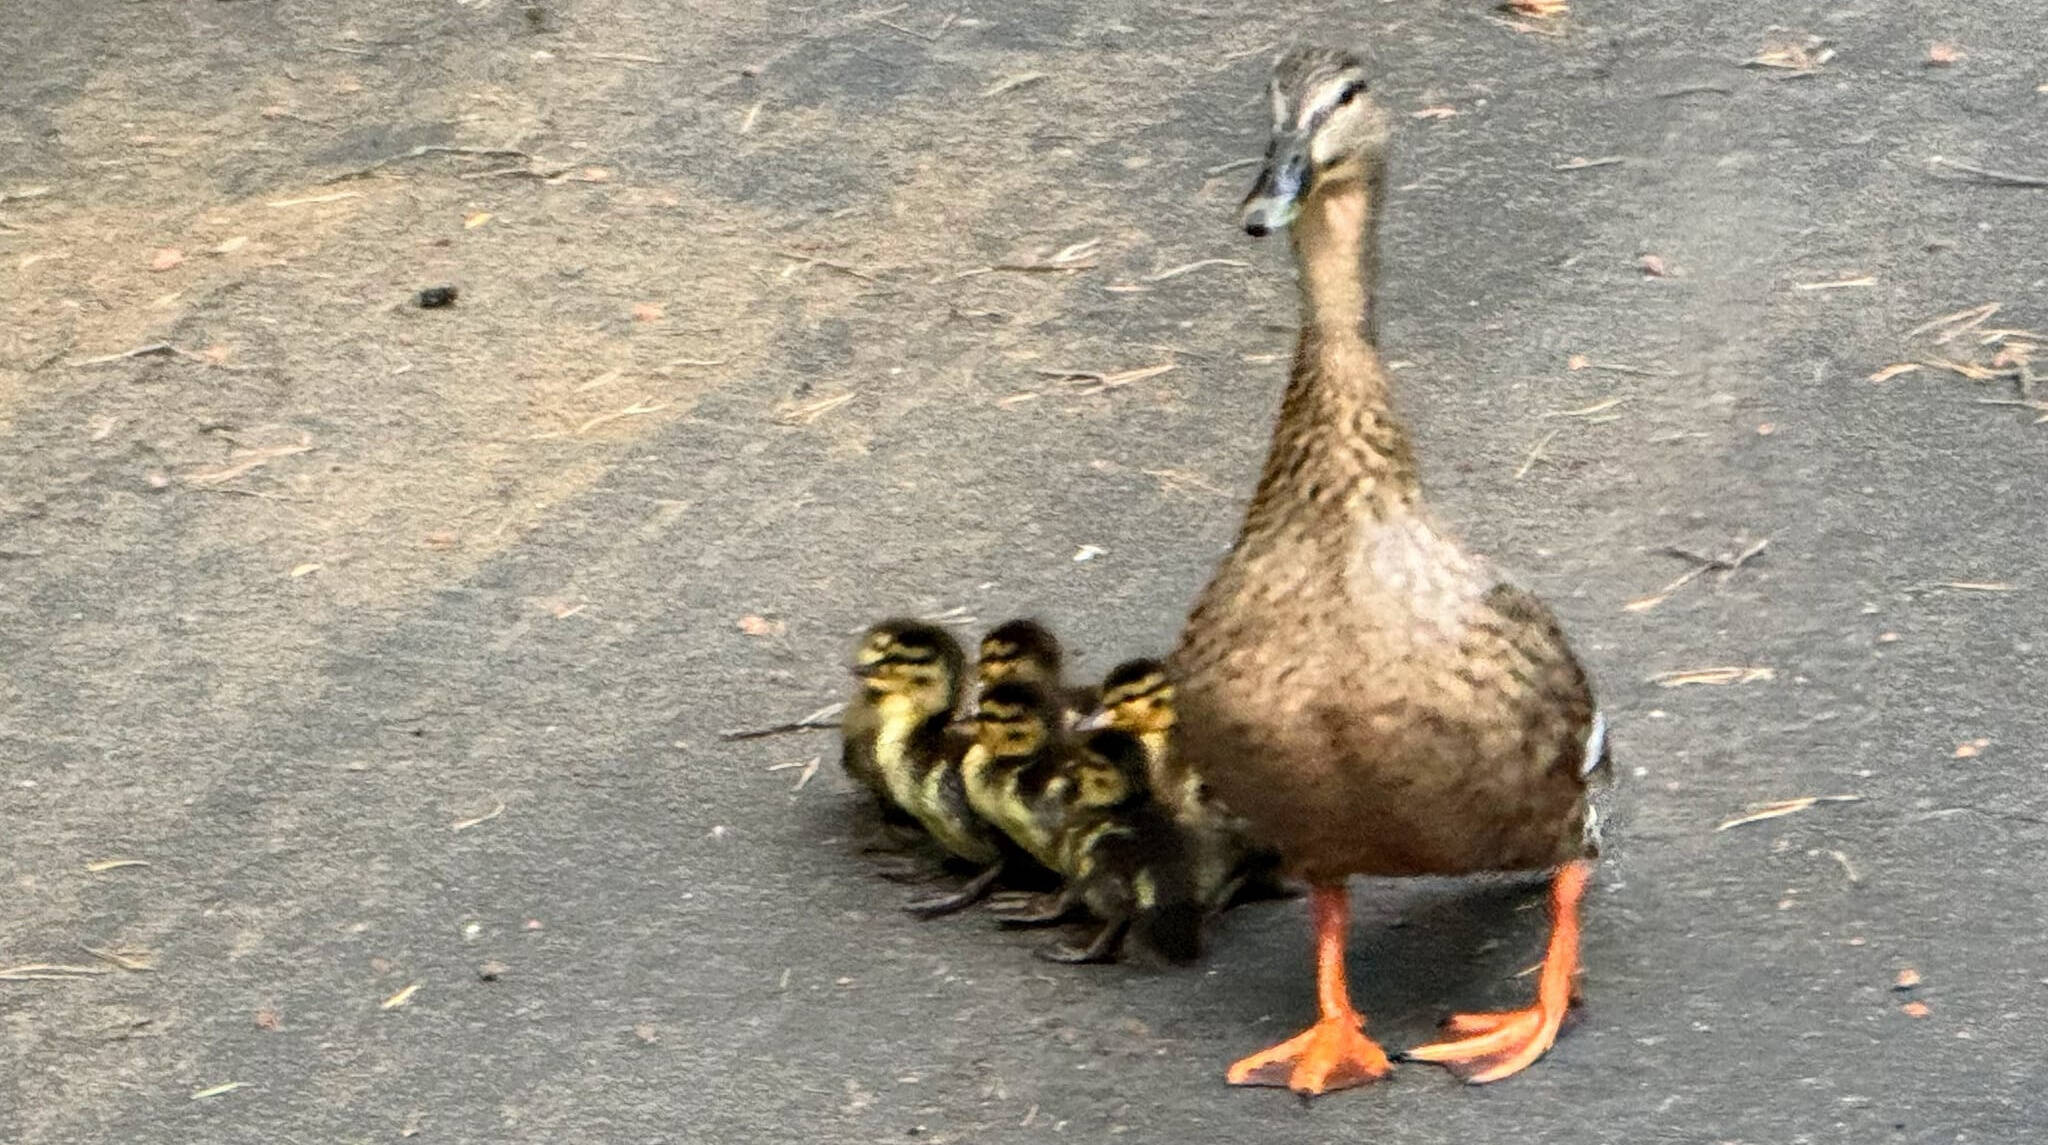 According to the Mercer Island Police Department, officers quacked the case by waddling into action and rescuing some ducklings that fell into a storm drain on the evening of April 29. They were reunited with their mother. Photo courtesy of the Mercer Island Police Department